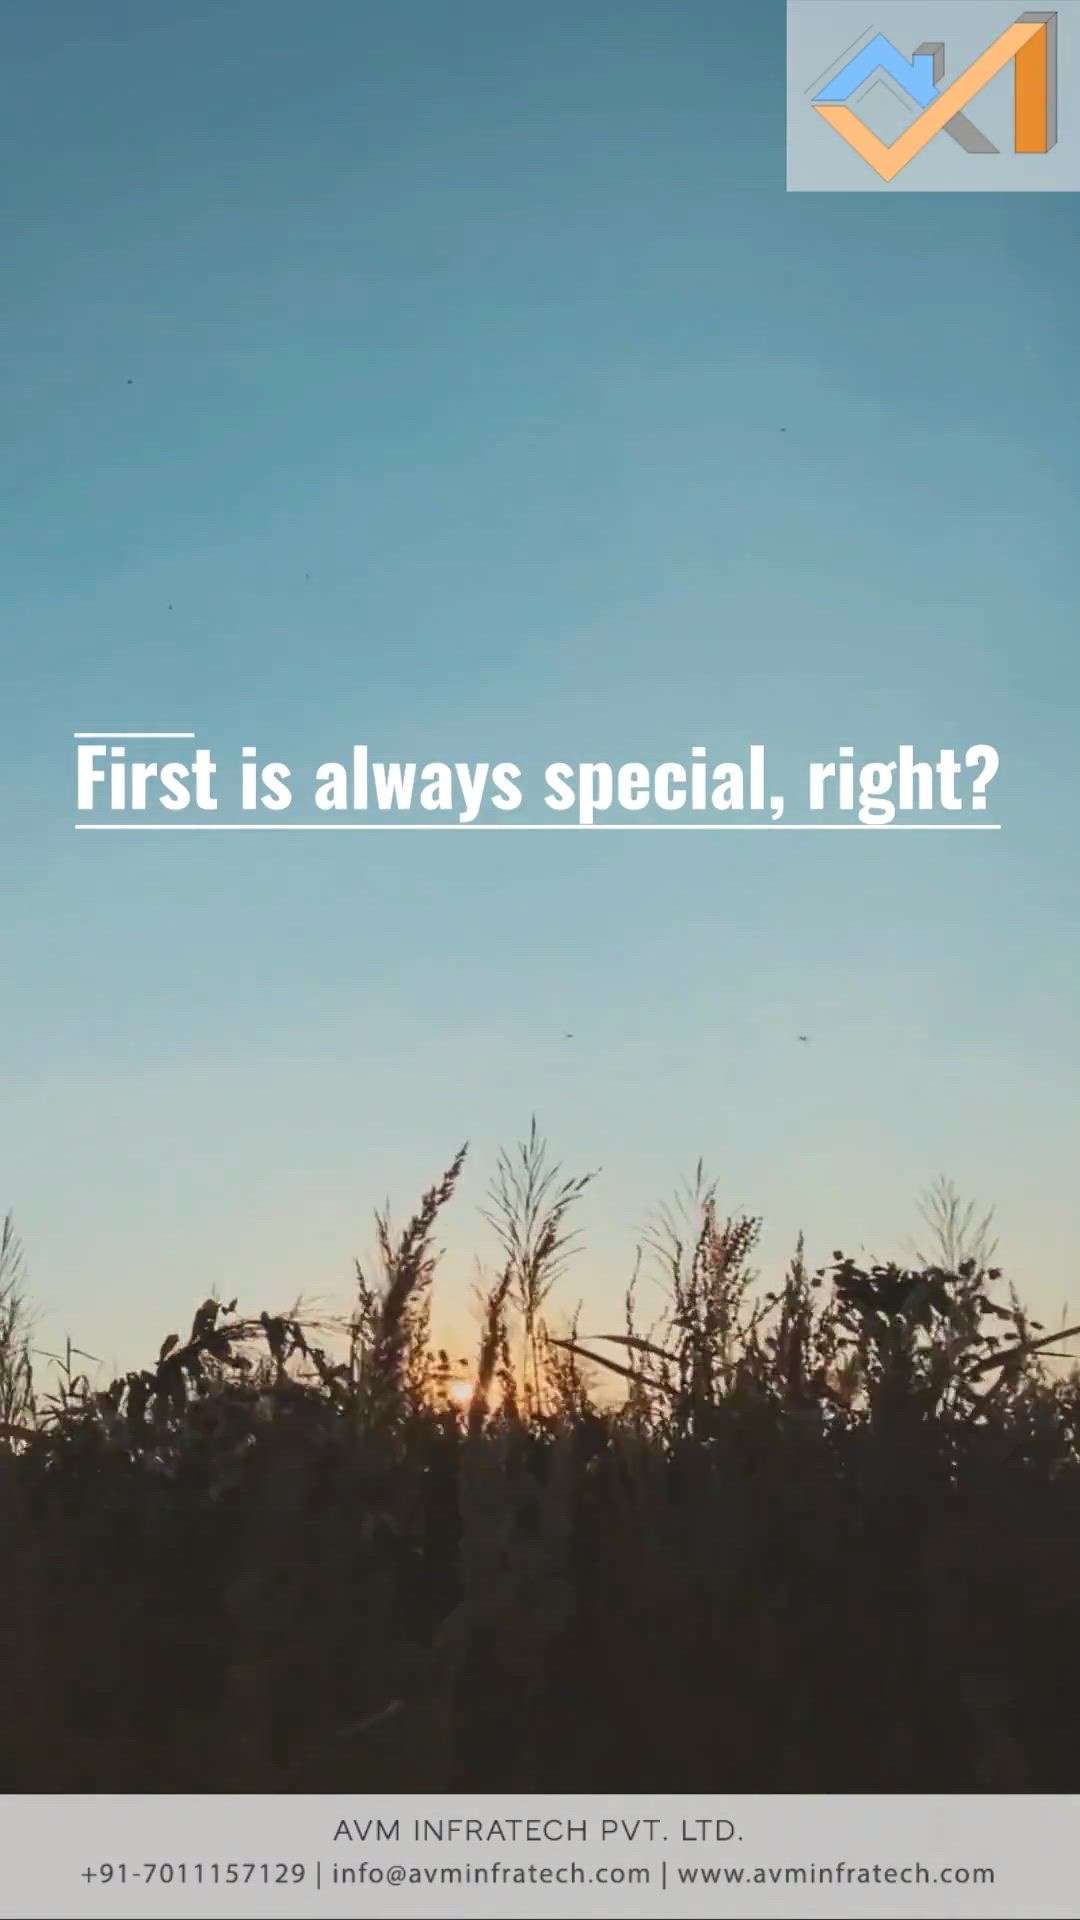 First is always special, right? Check out some glimpse of our journey.


Follow us for more such amazing updates. 
.
.
#first #firstisalwaysspecial #special #moment #specialmoments #motivation #success #successquotes #successmotivation #motivationalquotes #motivationalvideos #architect #architecture #interior #interiordesign #kitchen #vastushastra #architectural #knowledge #motivate #company #growing #growth #success